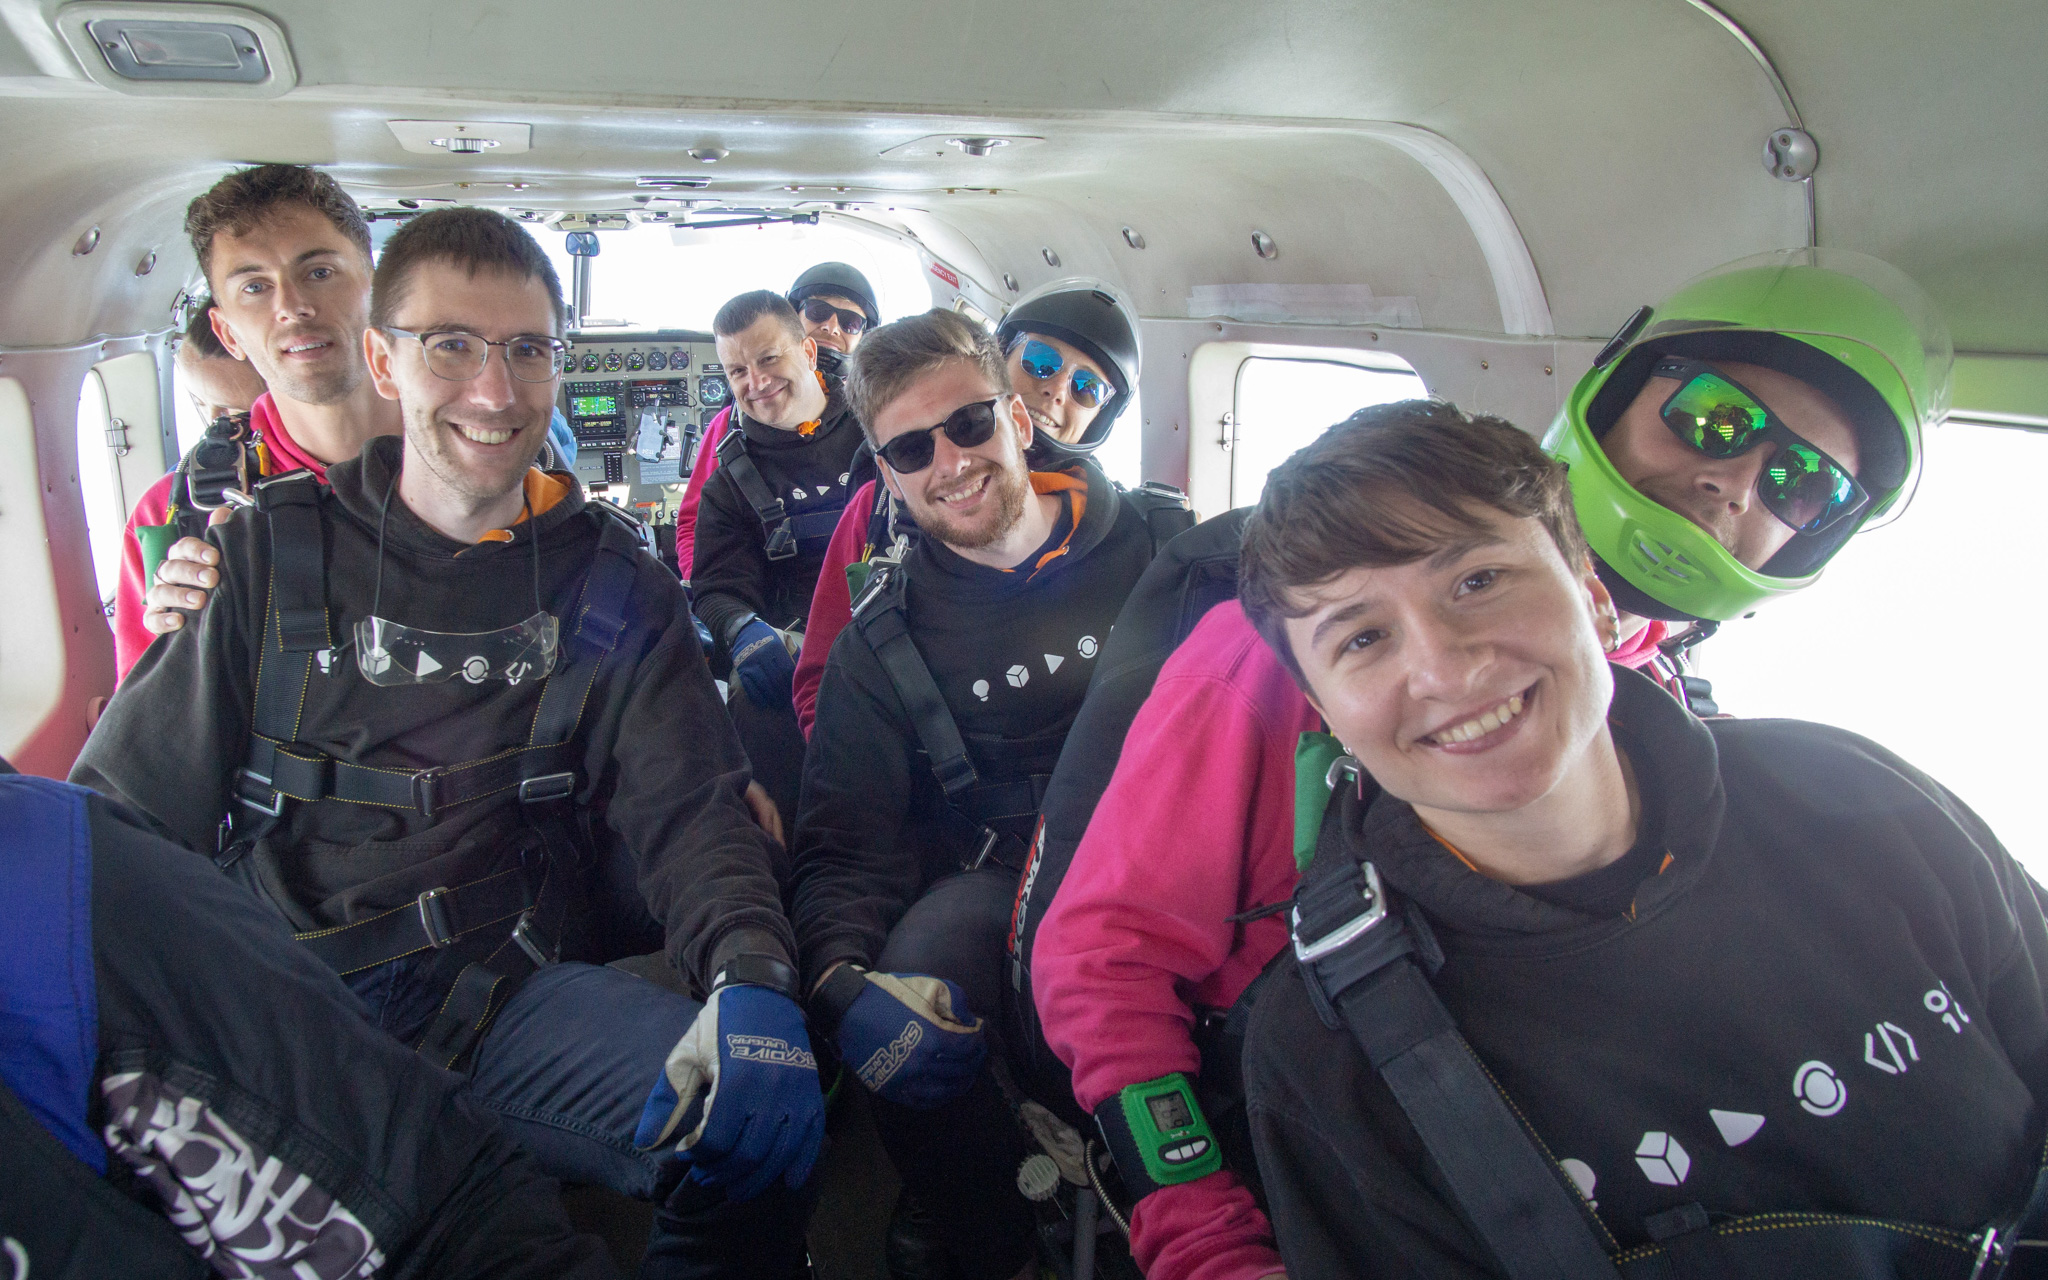 Local charity skydive with Safe & Sound!